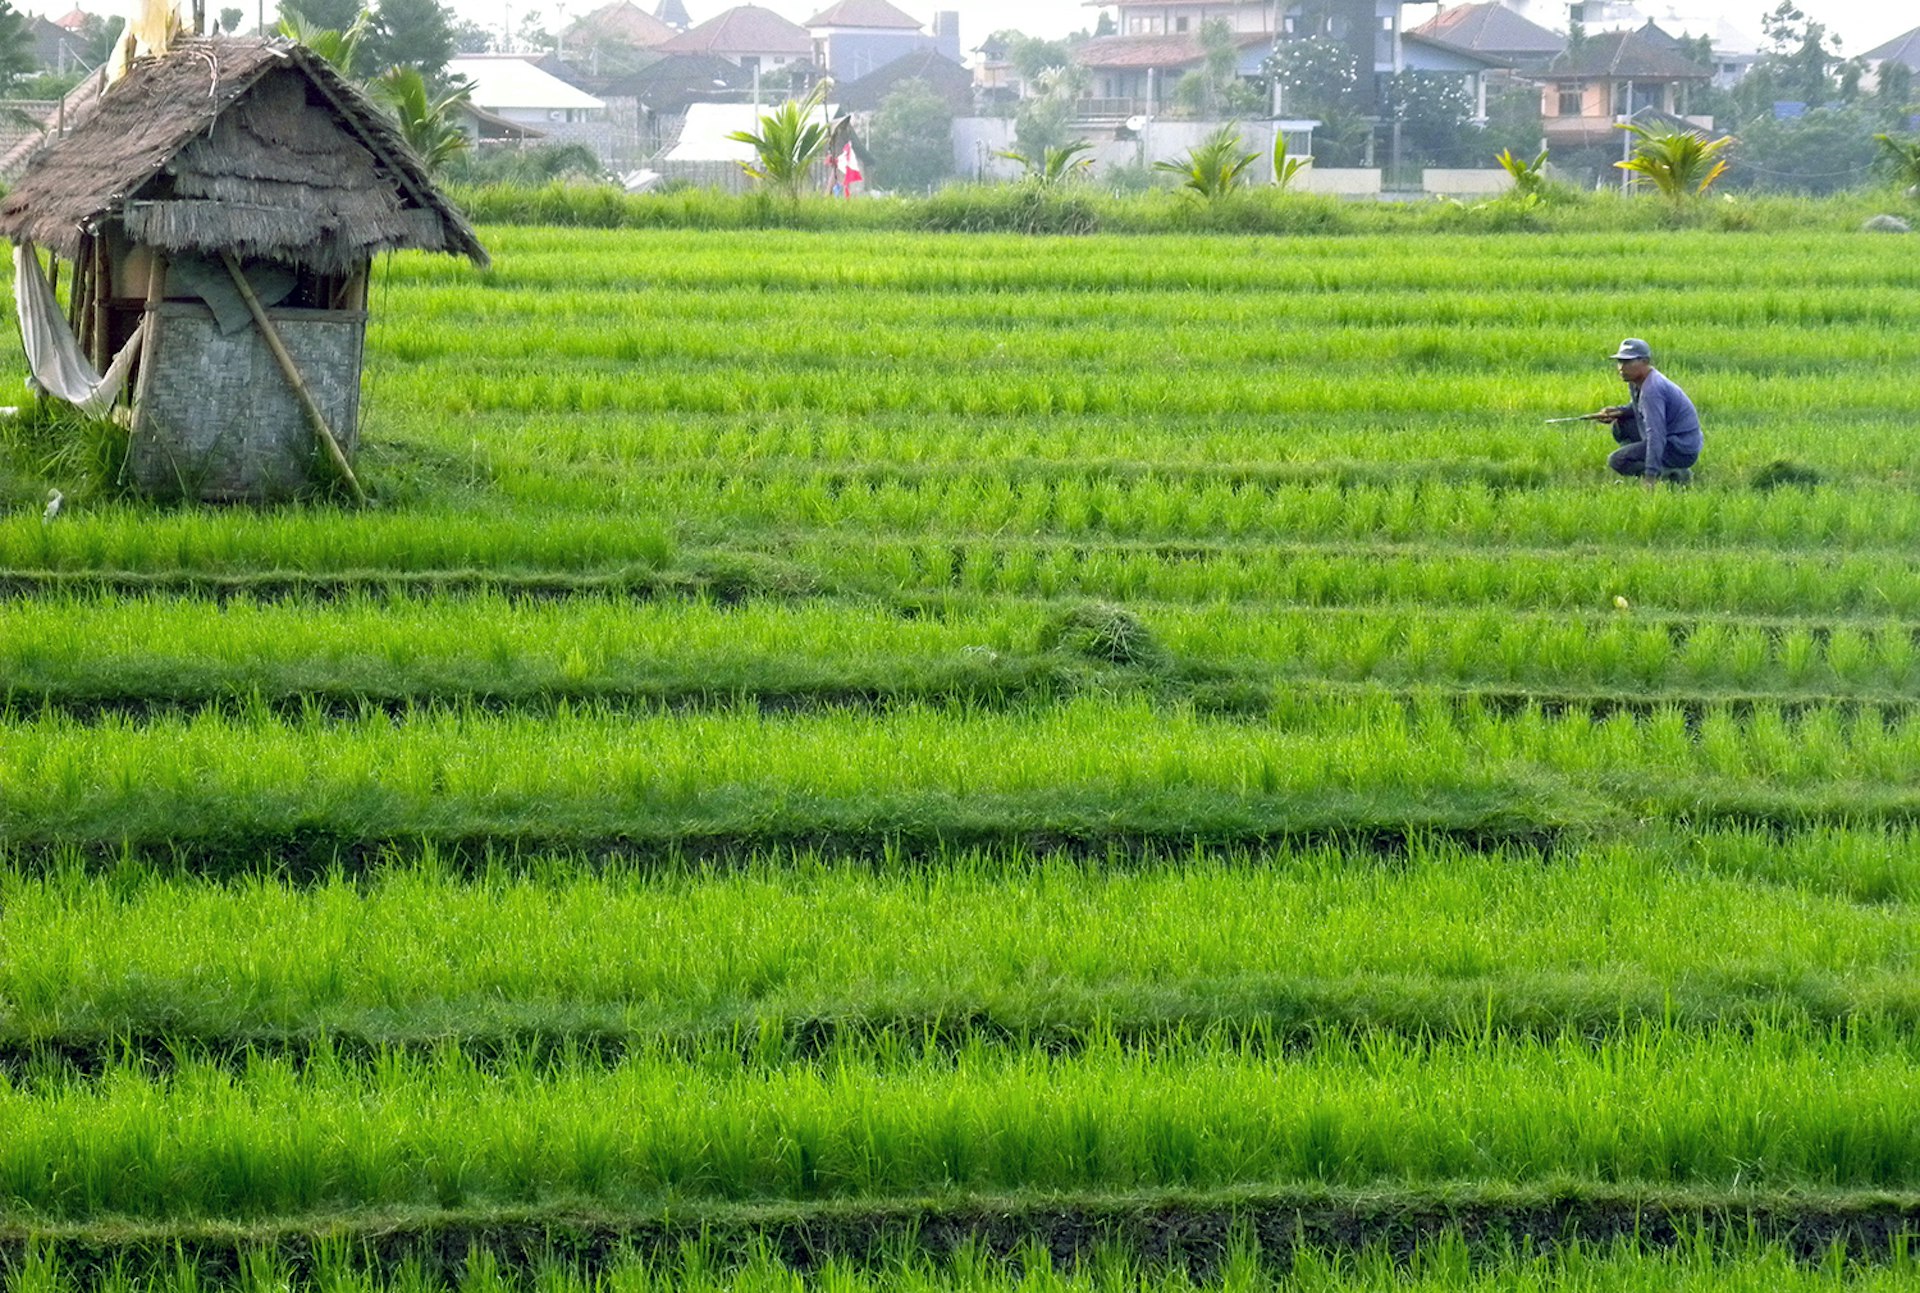 Vibrant rice fields in Canggu, one of Bali's most iconic sights. Image by Jason Paris / CC BY 2.0